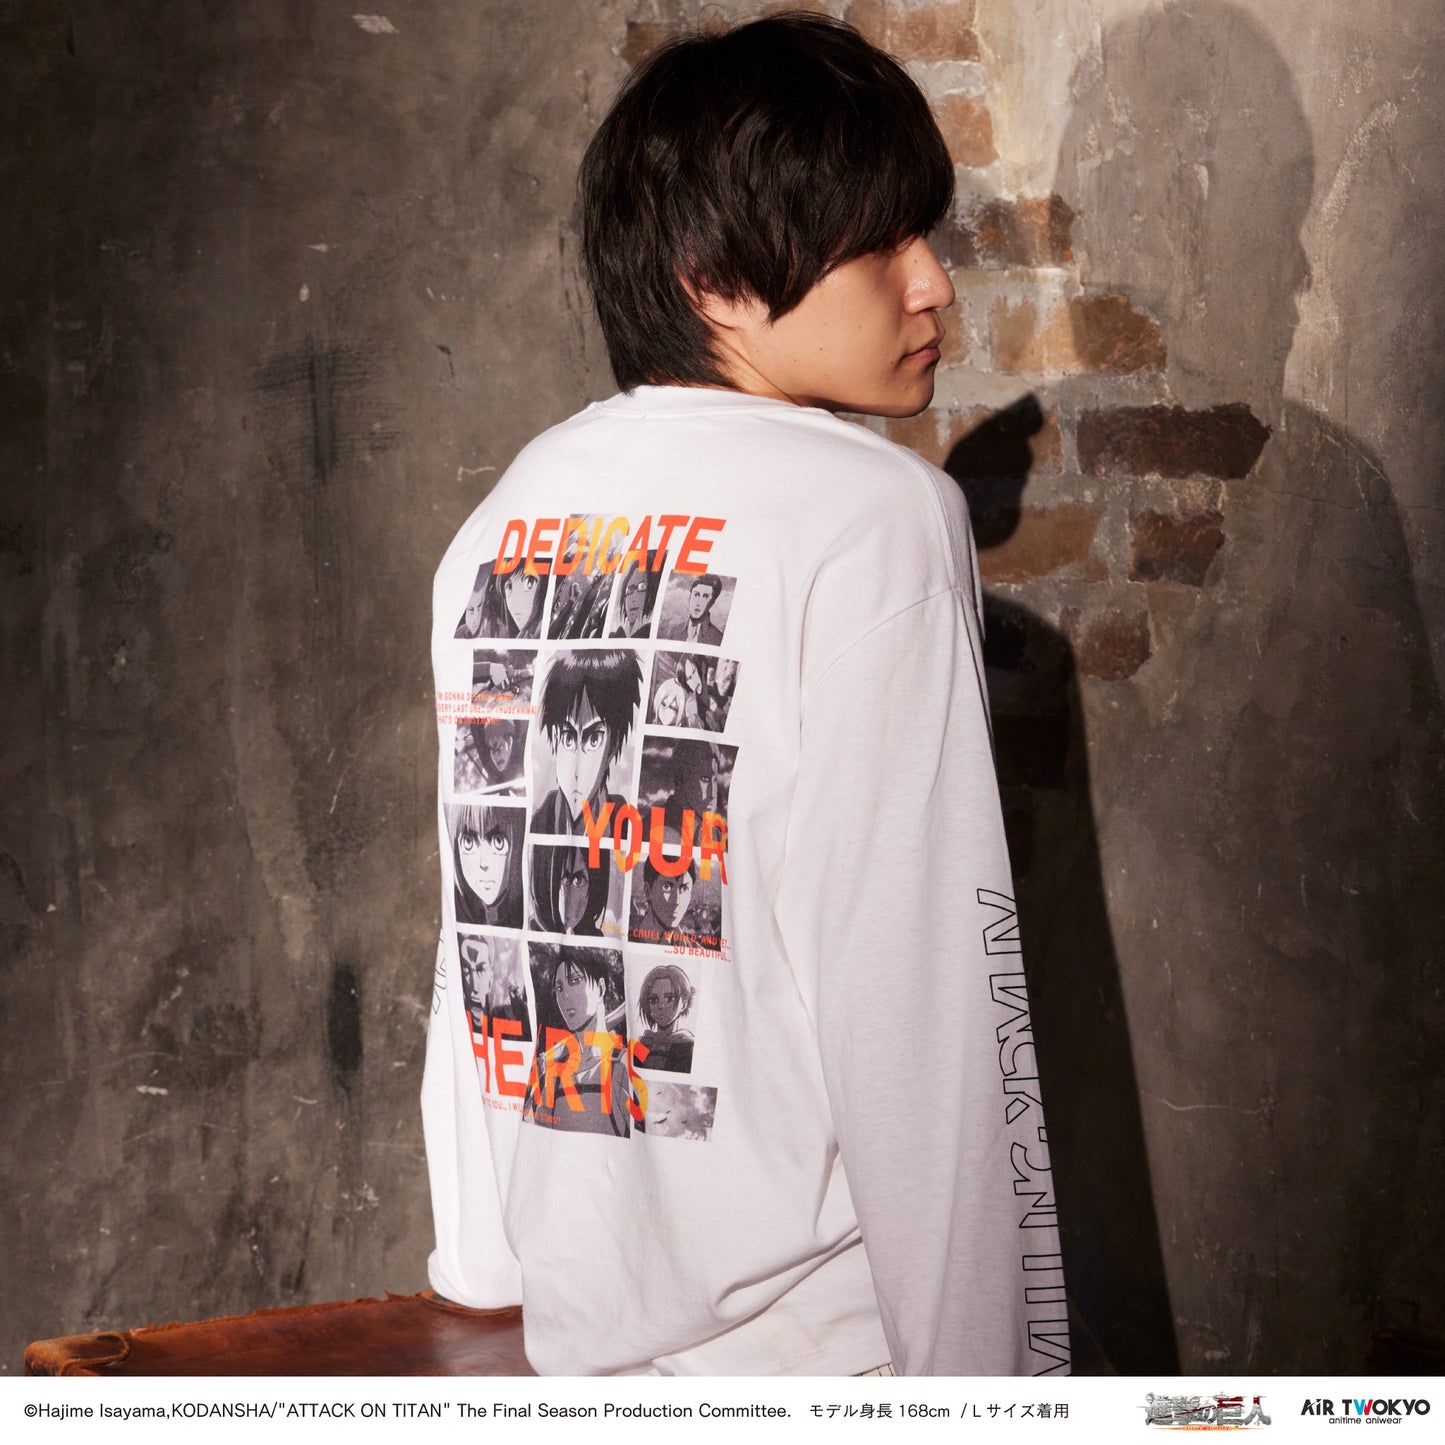 "Attack on Titan" Season 1-3 Collage Graphic Long Sleeve T-shirt